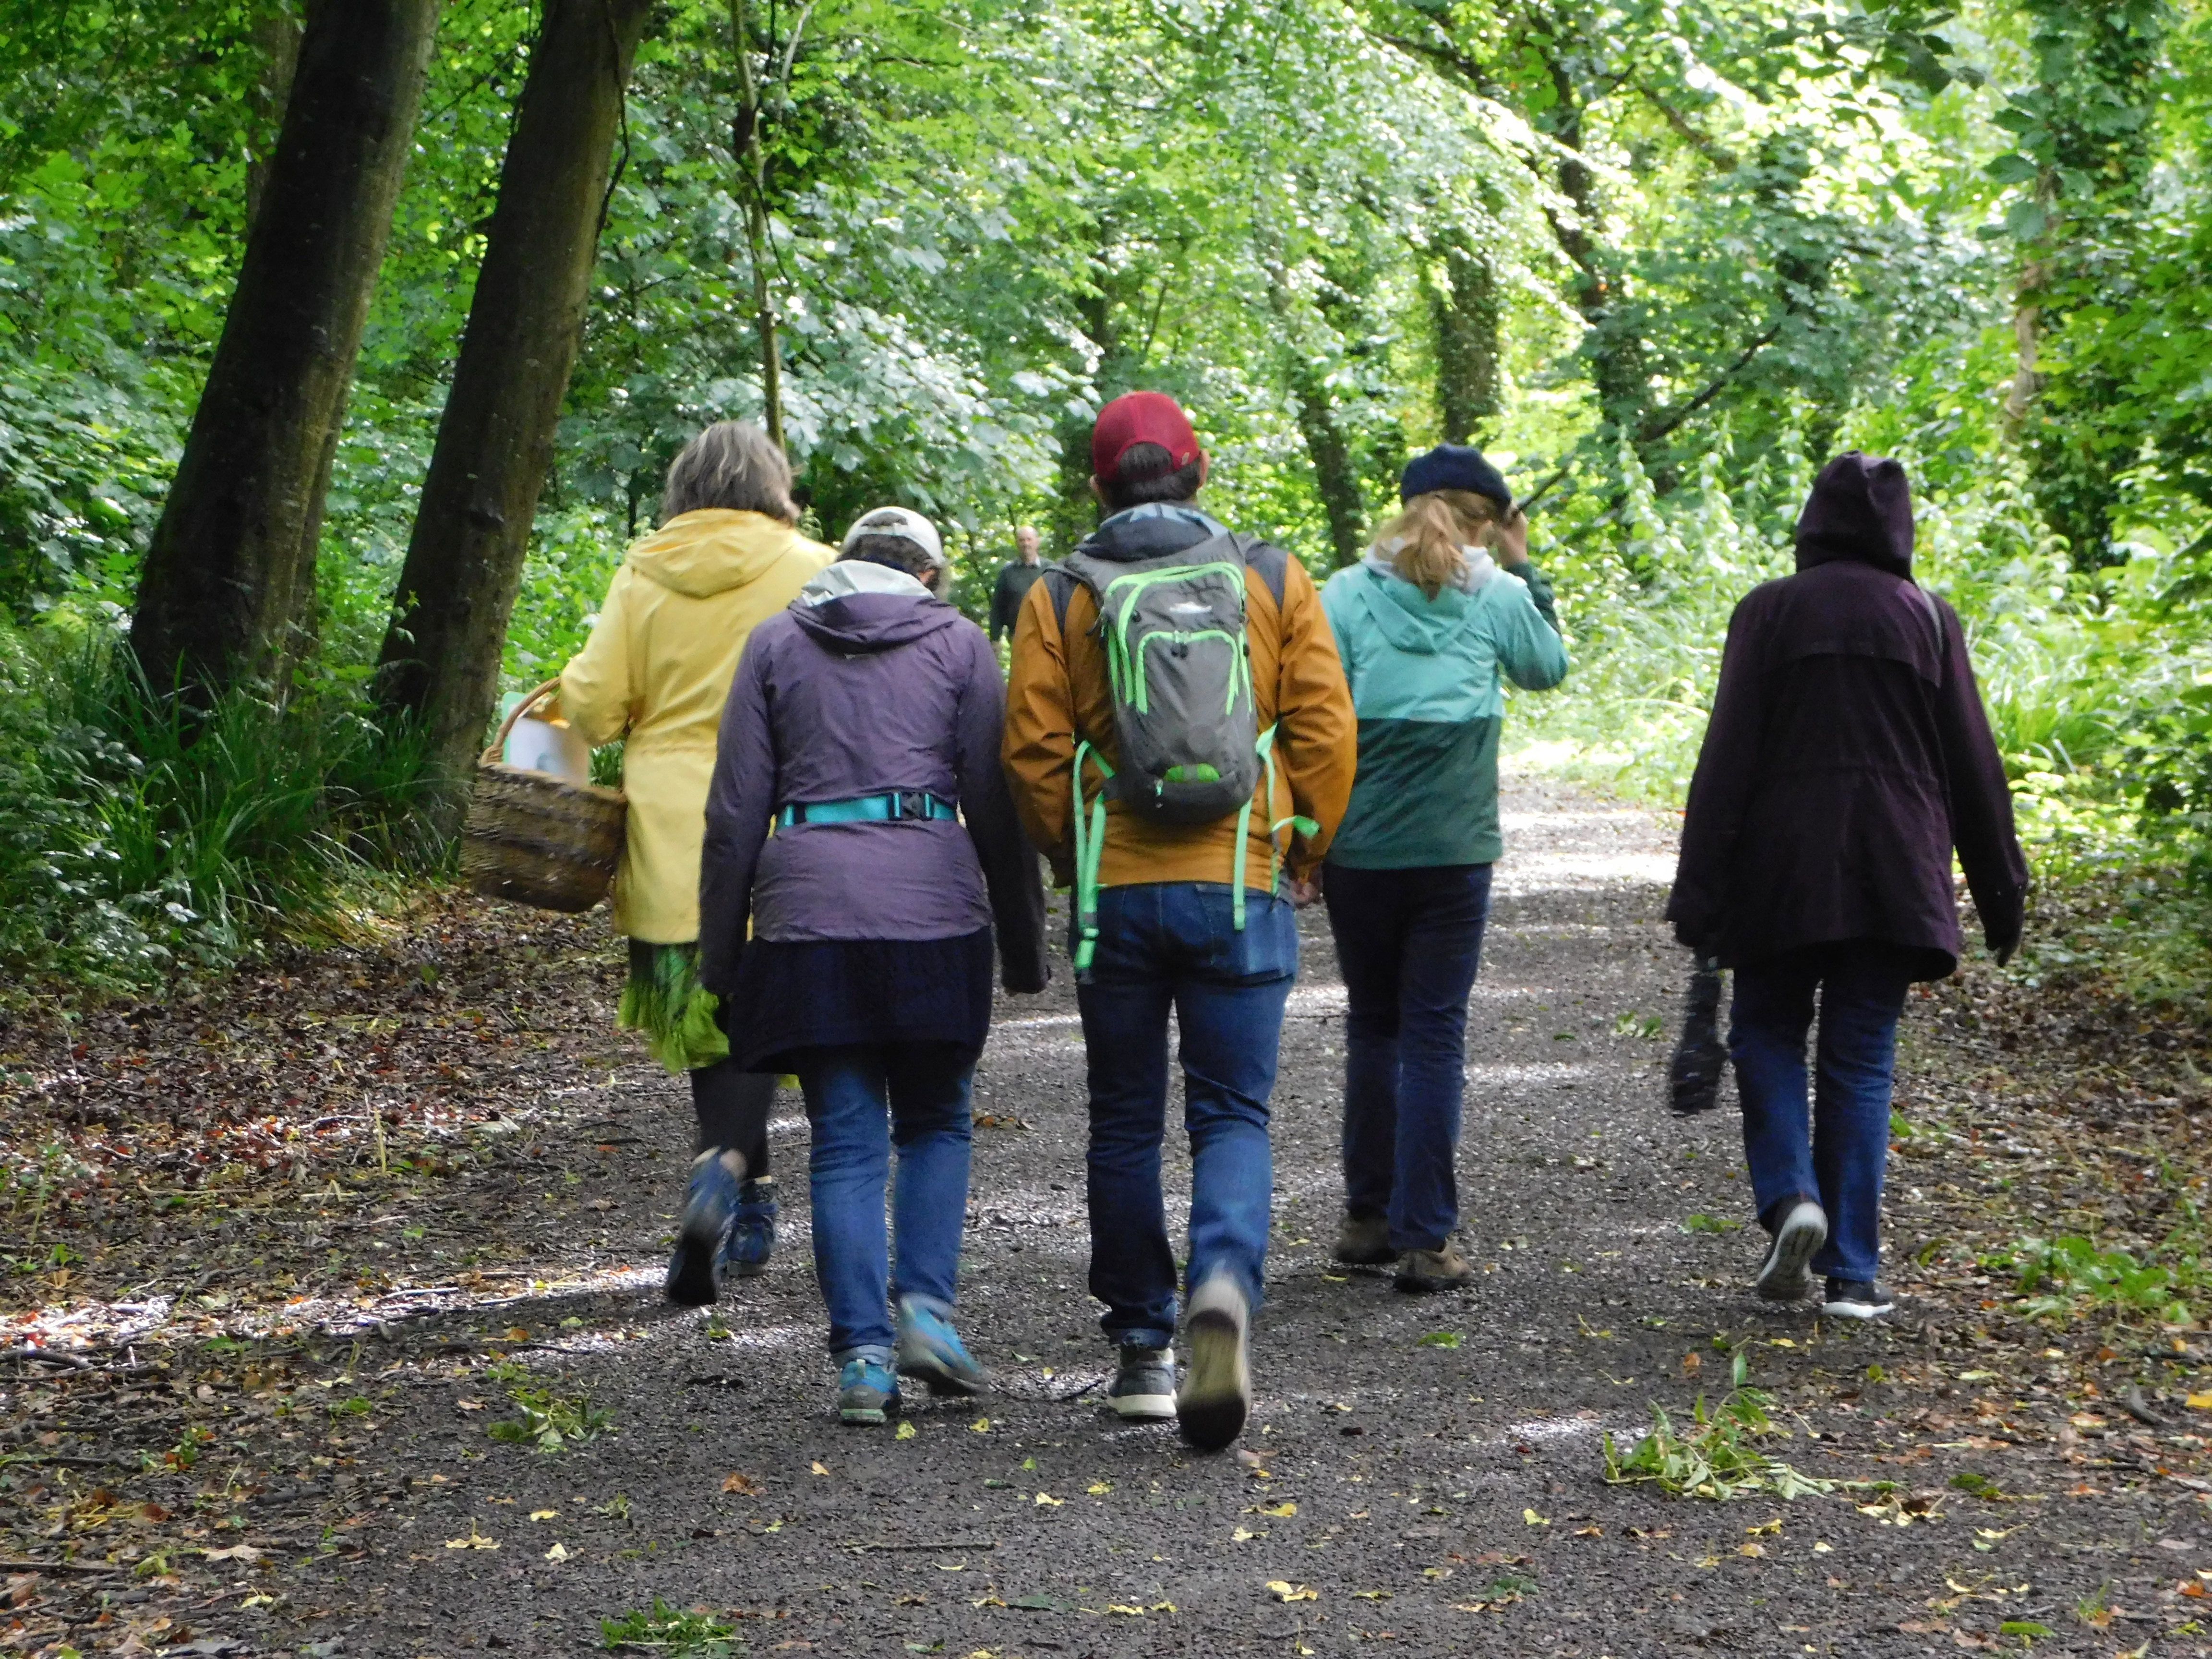 Lorraine (far left) leads the way on our Gallivanting Tour through the Courtown Woods near Gorey, Co. Wexford.  She gave us a wealth of information about foraging sprinkled with Irish folklore tales.